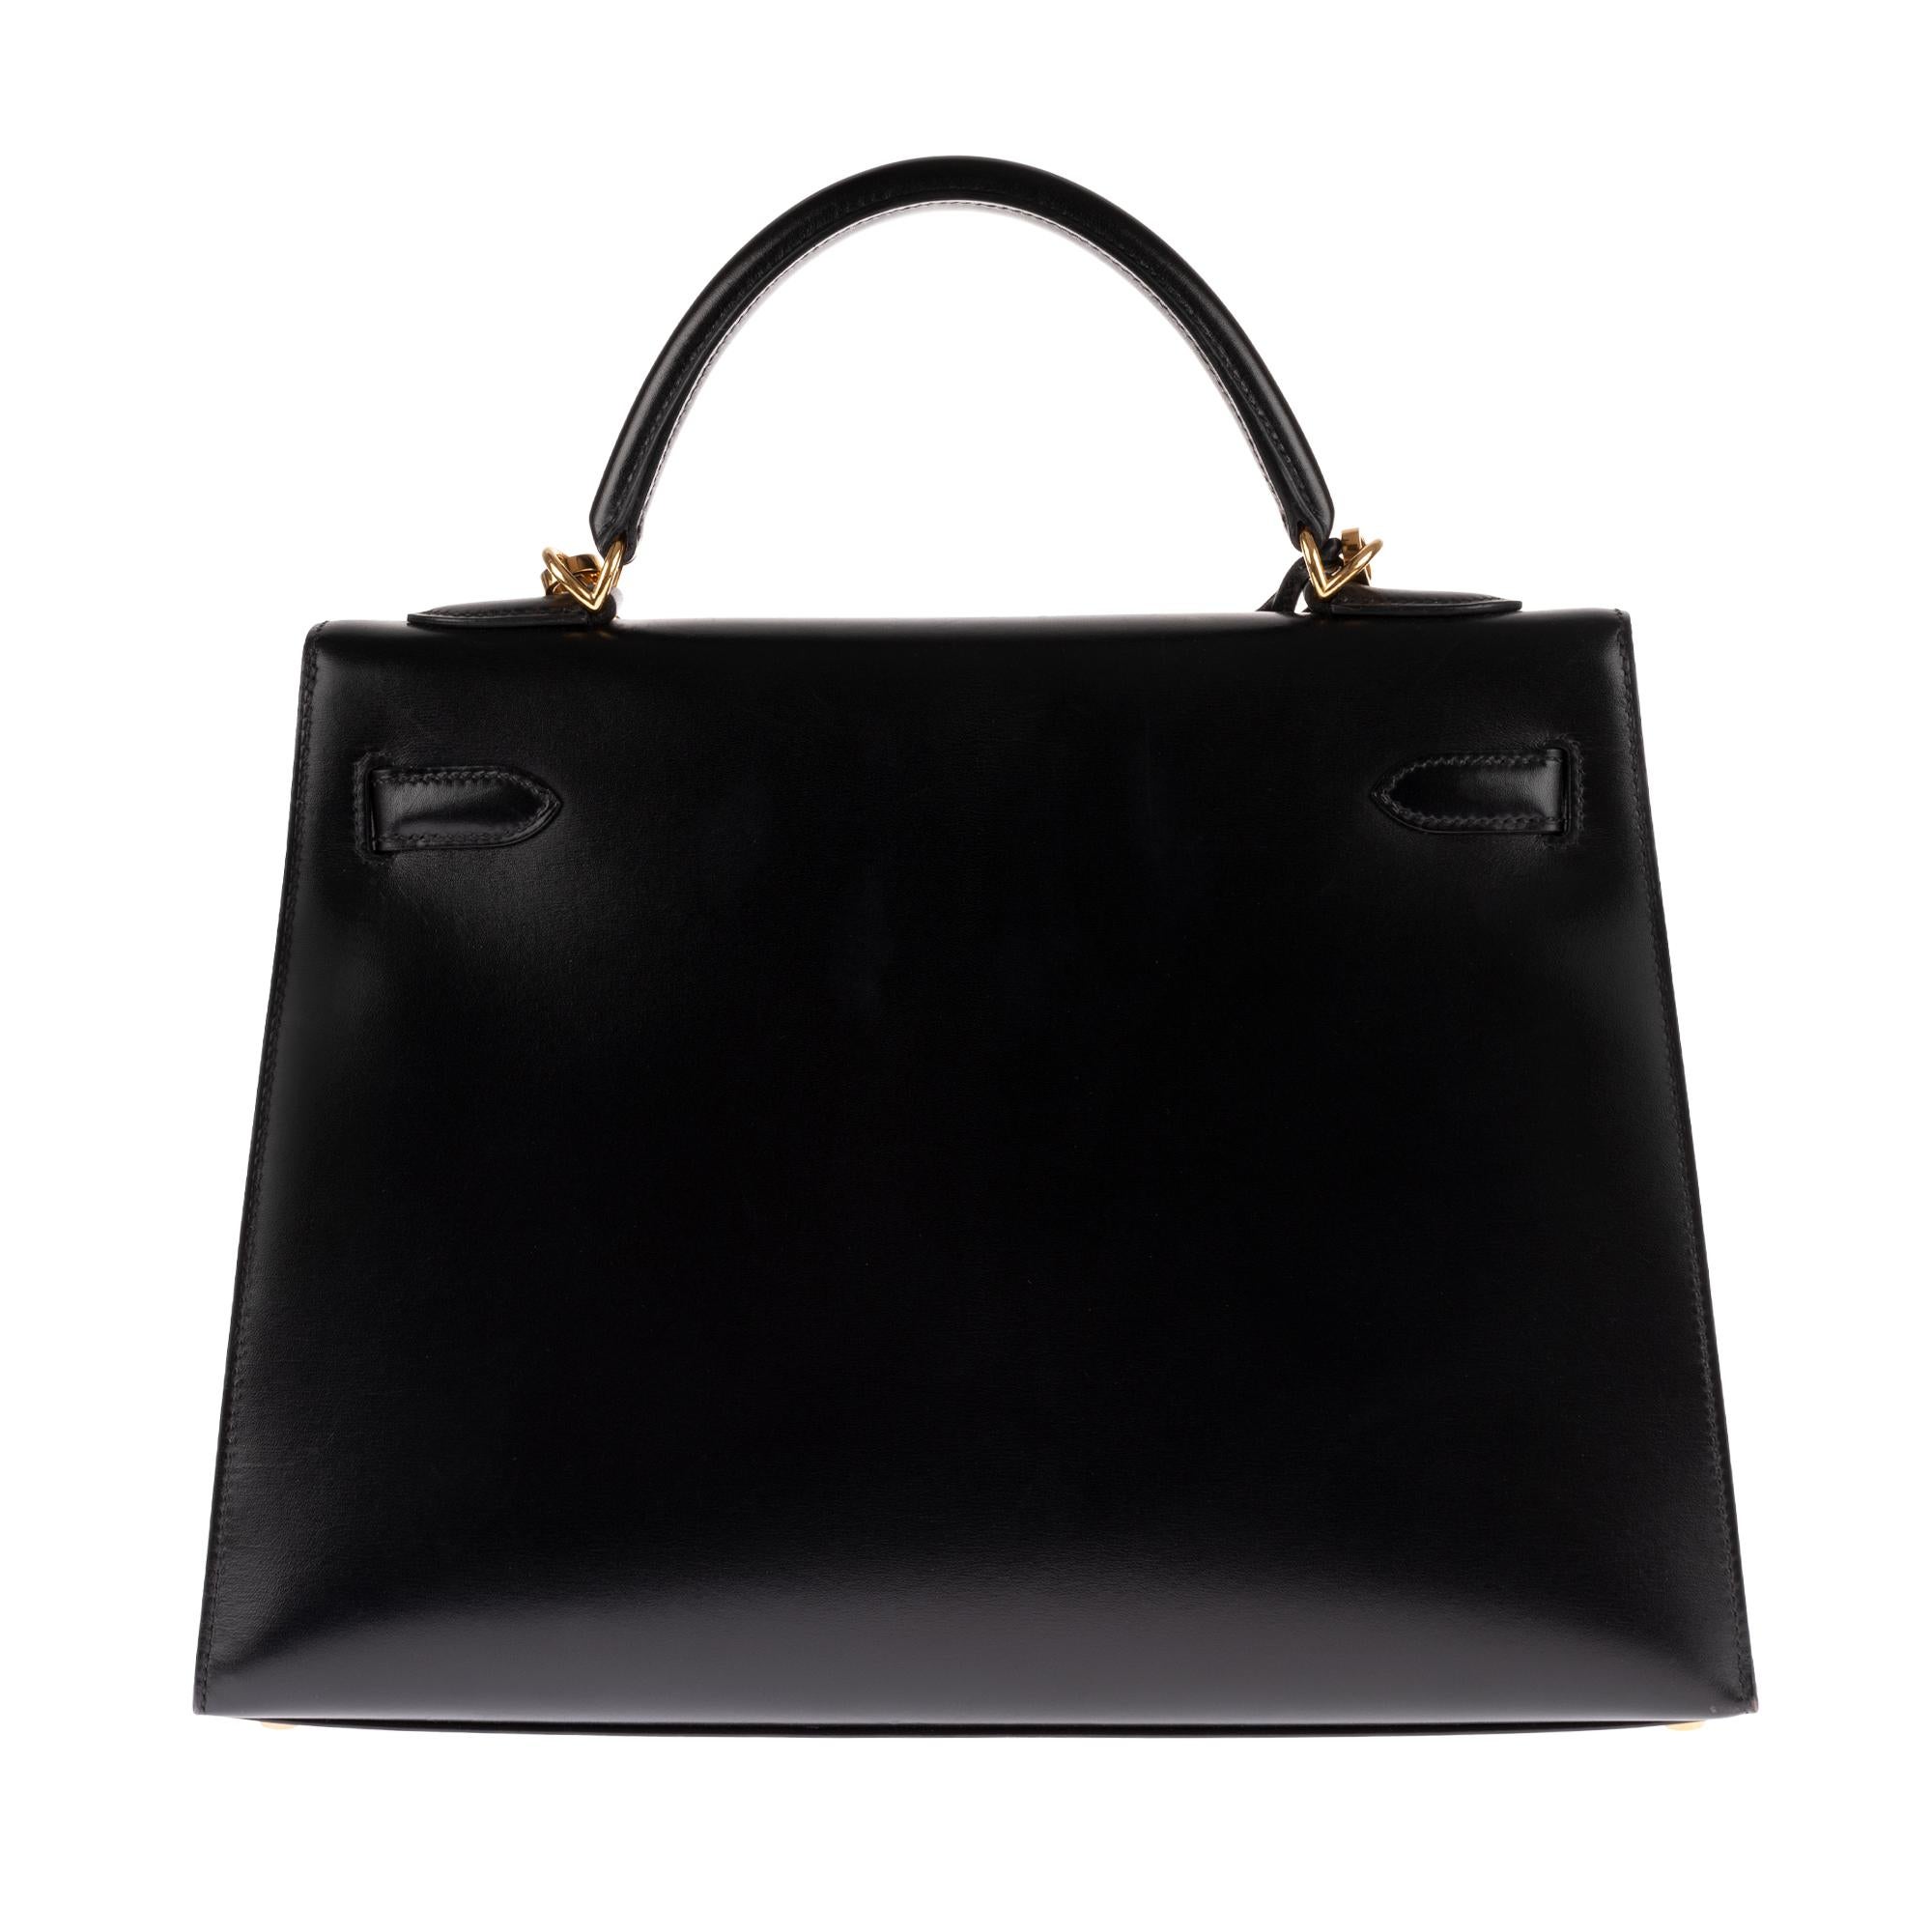 A real jewel and very rare piece: Hermès Kelly handbag 32 cm sellier with shoulder strap in black calfskin leather, gold plated metal trim, simple handle in black leather, strap handle in black calfskin leather for carrying hand or shoulder. Closure